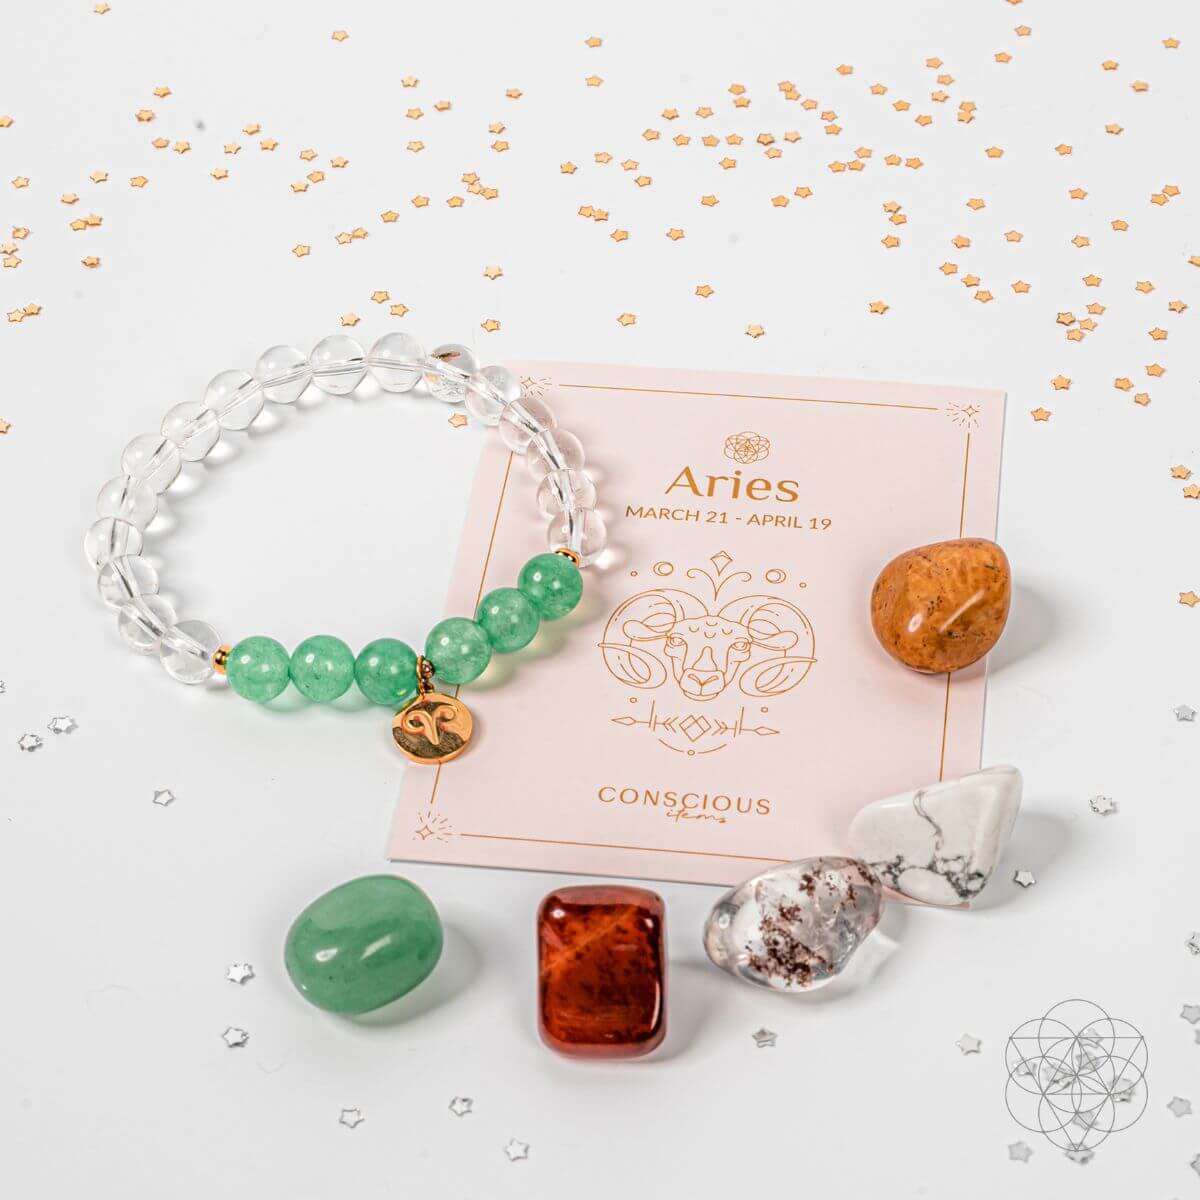 Aries Bracelet and Crystals Set